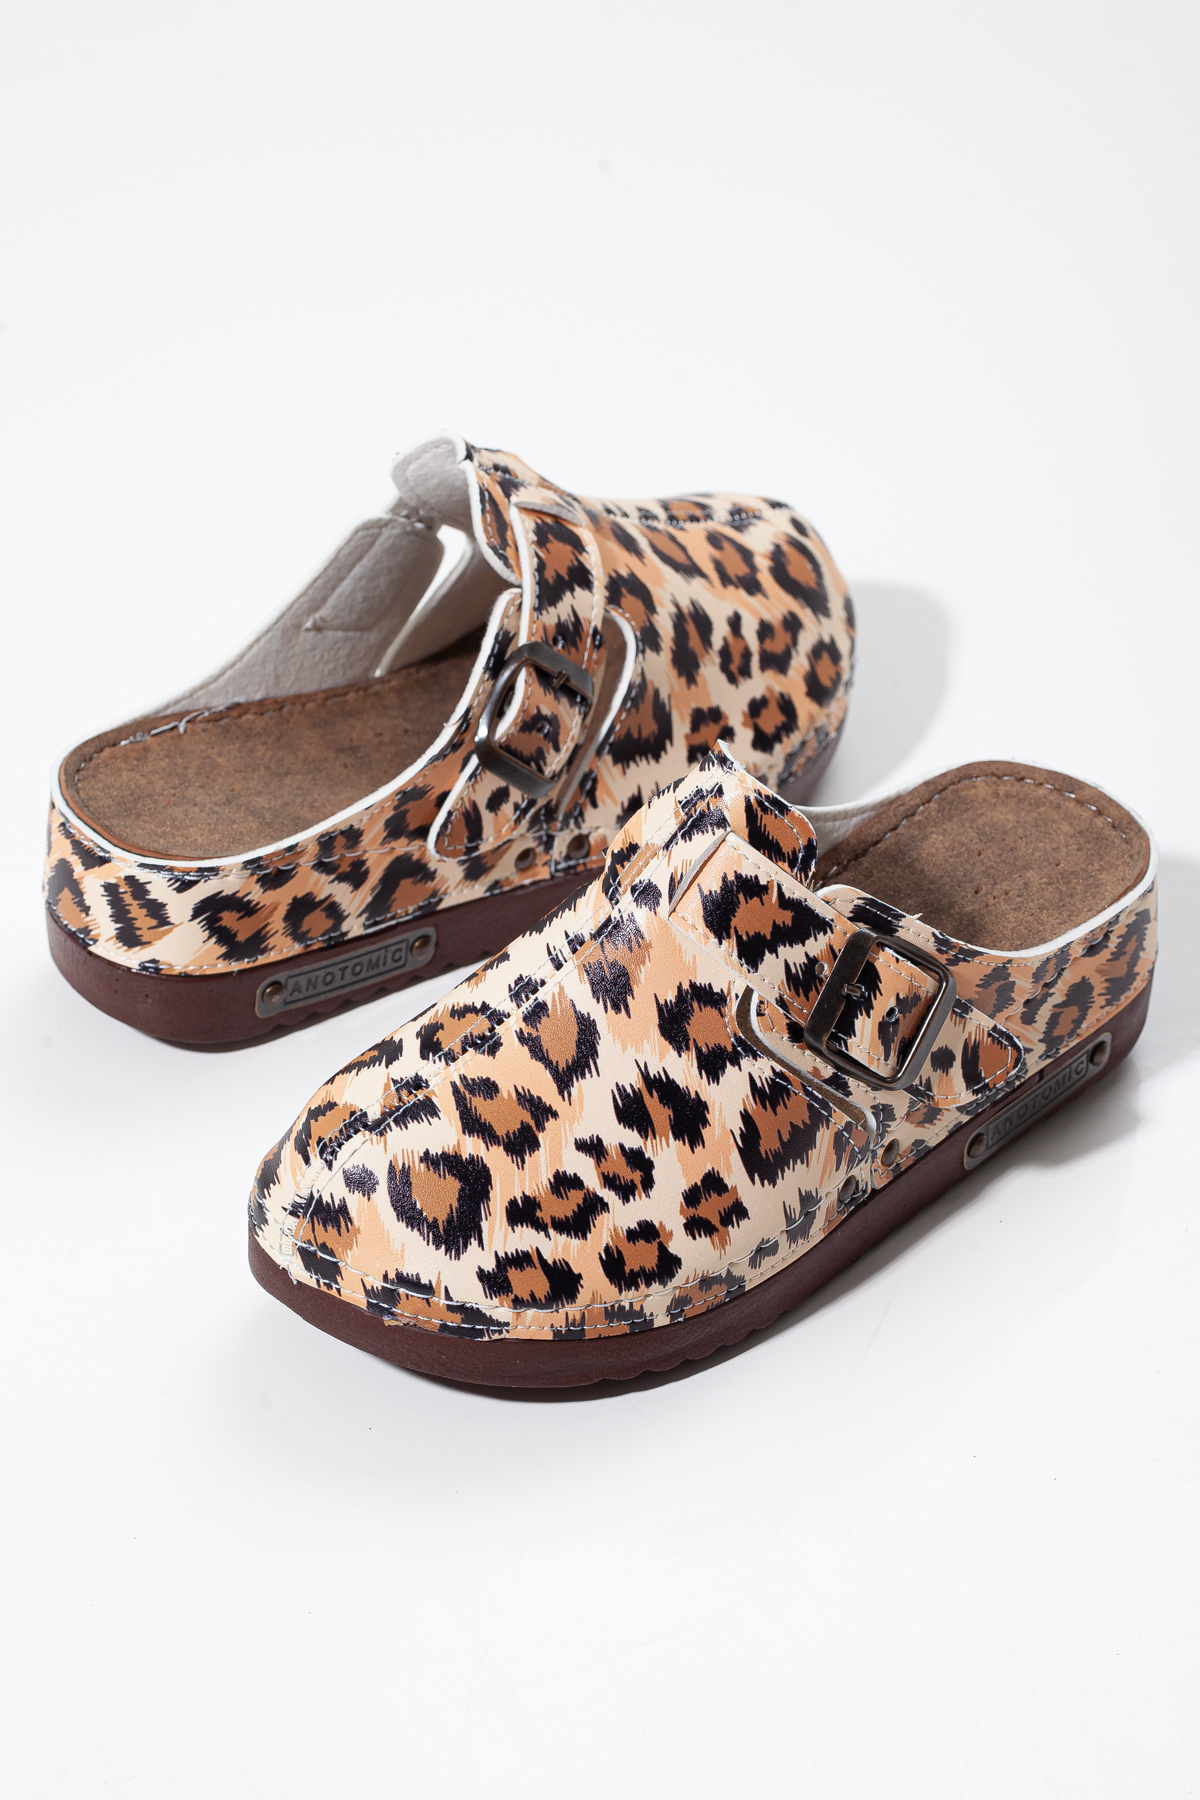 Orthopedic Anatomical Perforated Breathable Premium Leopard Women's Sabo Slippers